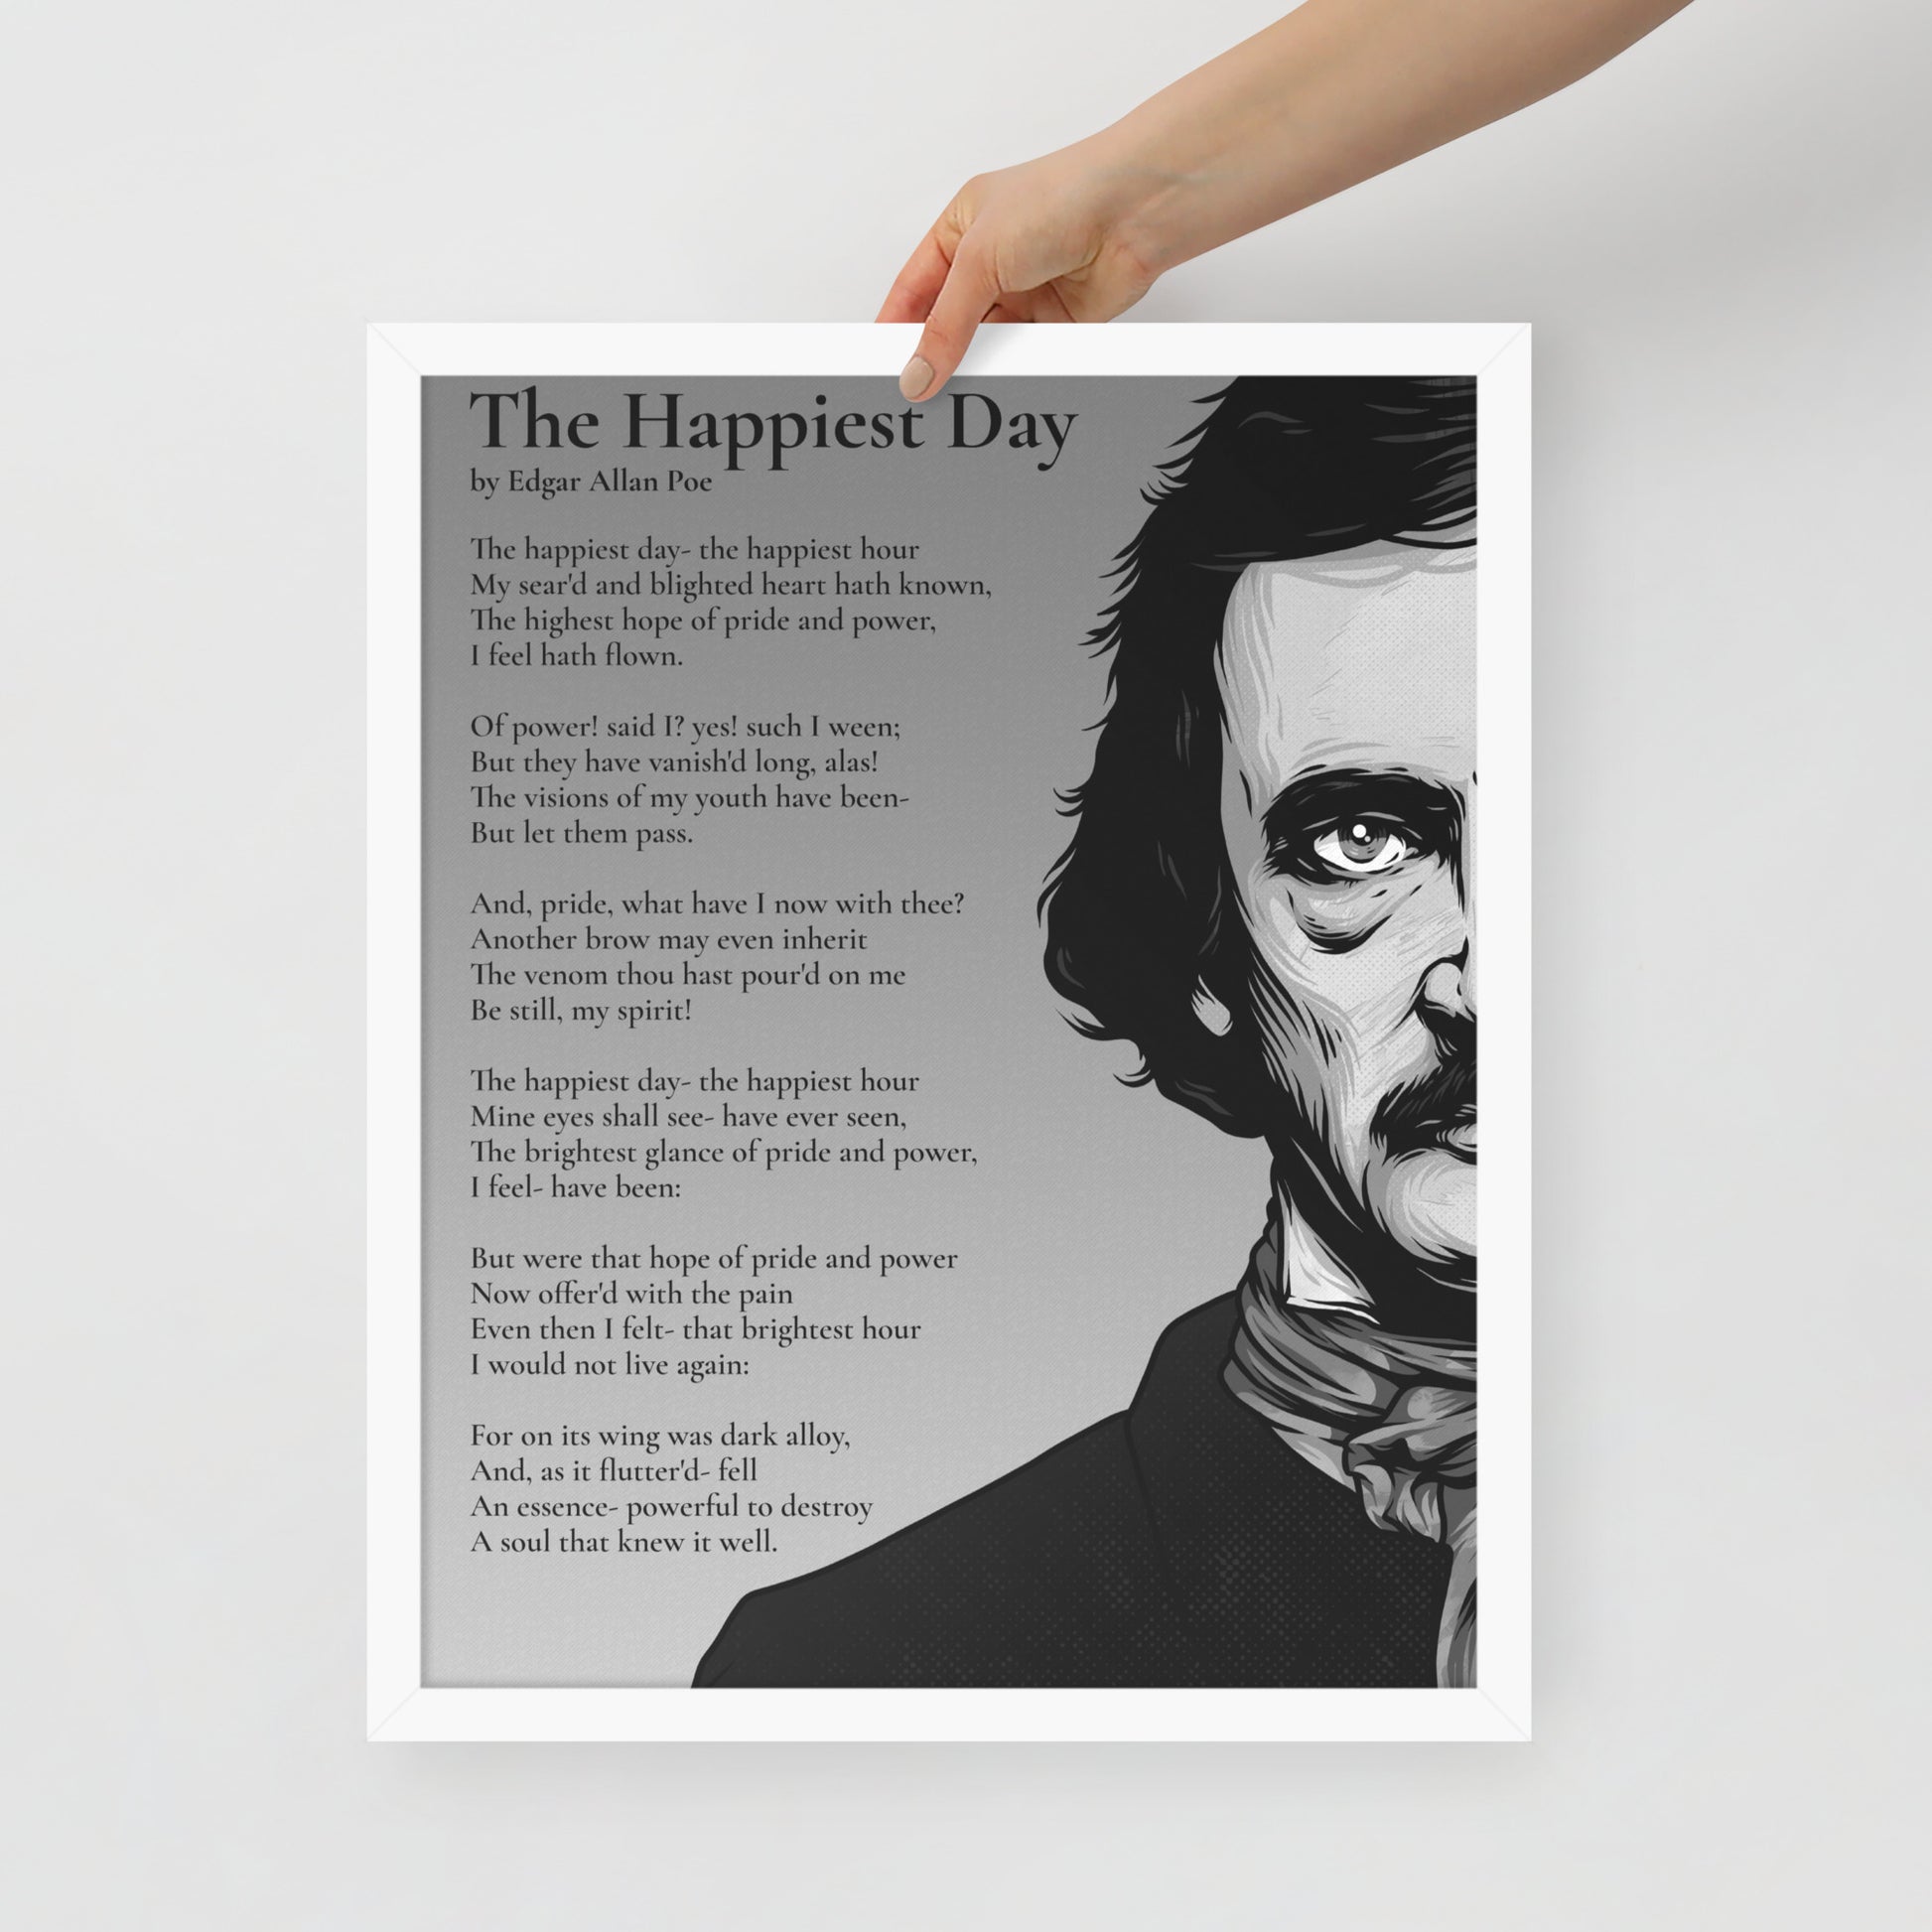 Edgar Allan Poe's 'The Happiest Day' Framed Matted Poster - 16 x 20 White Frame